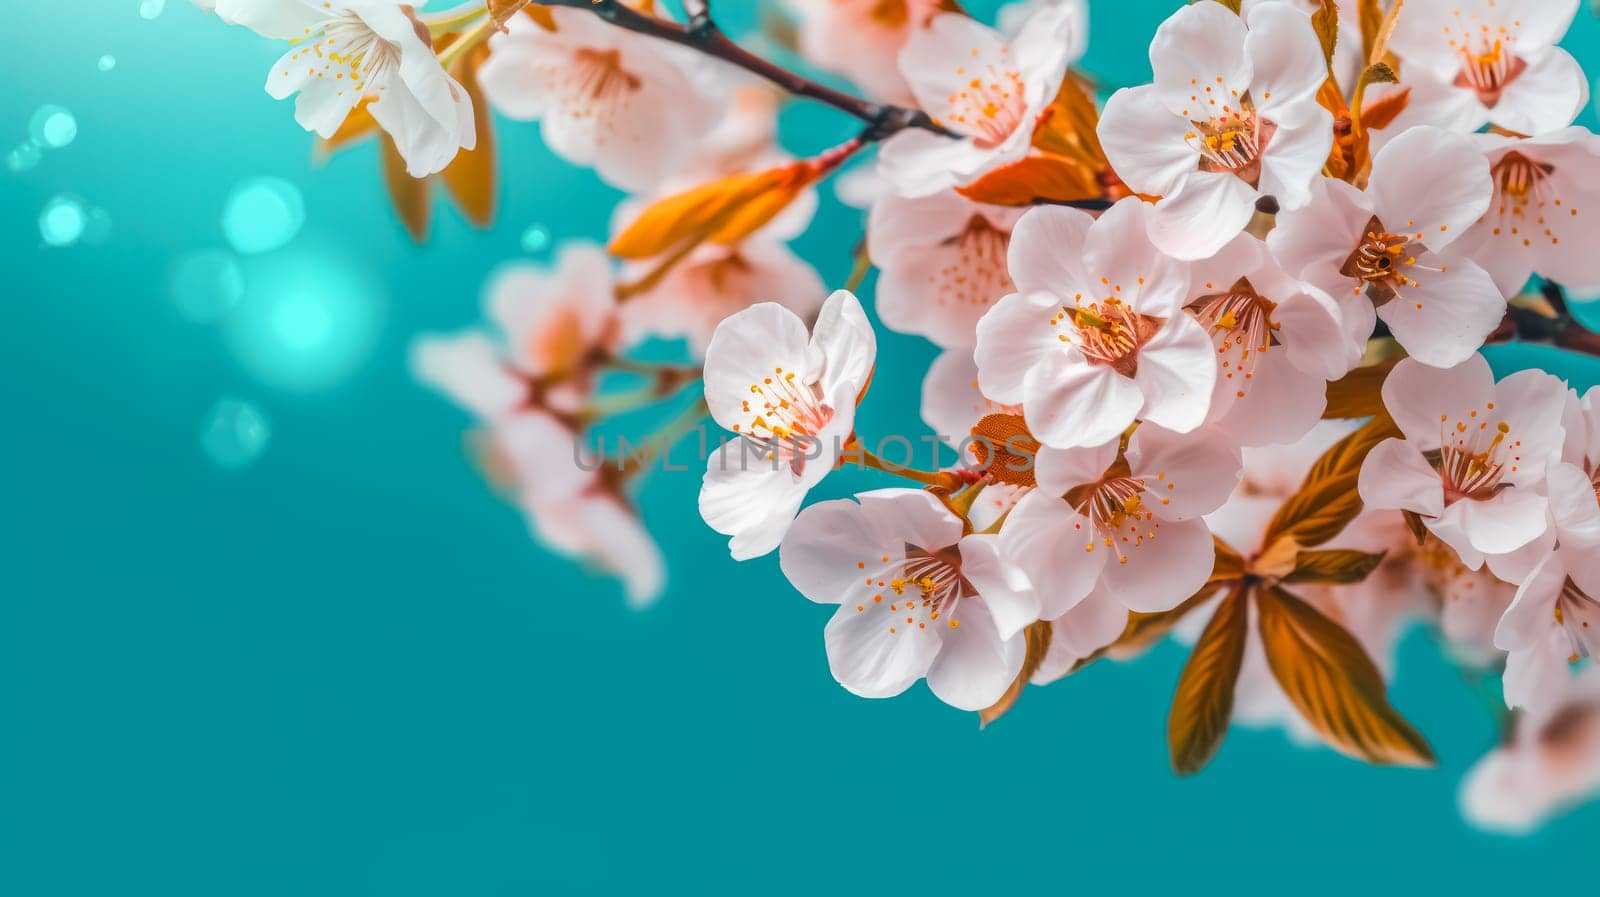 A breathtaking ode to springs arrival delicate white apricot flowers adorn branches, creating a beautiful and enchanting background for your creative projects.